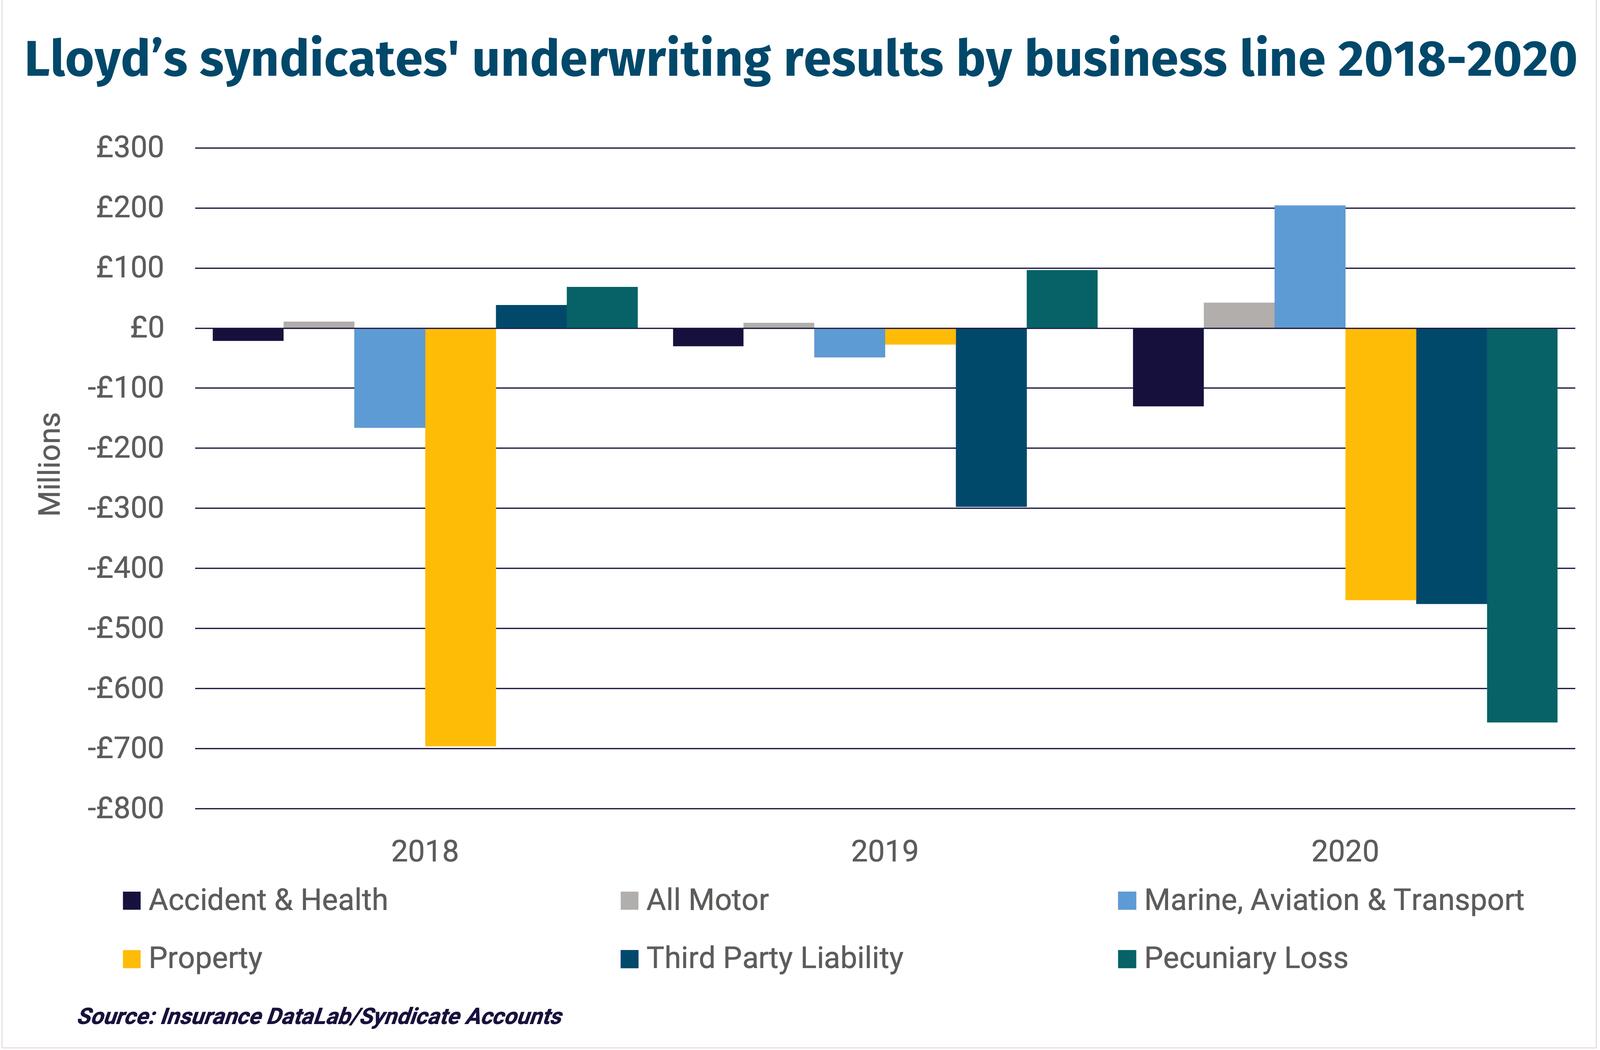 Lloyd’s syndicates' underwriting results by business line 2018-2020